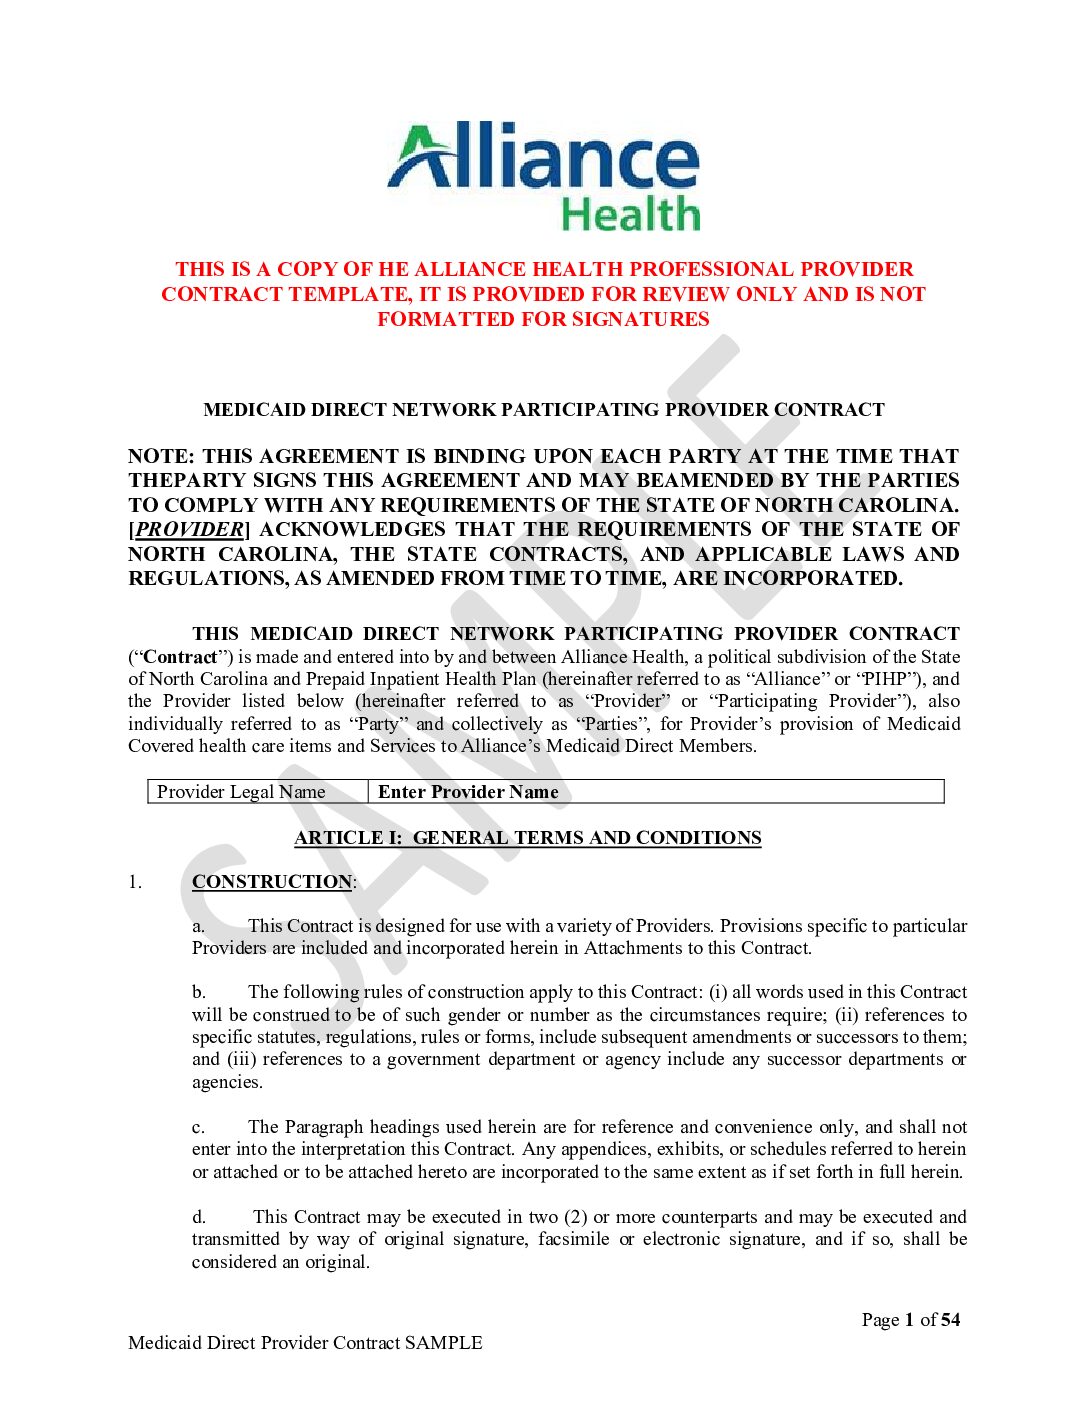 Alliance Health Medicaid Direct Provider Contract Template